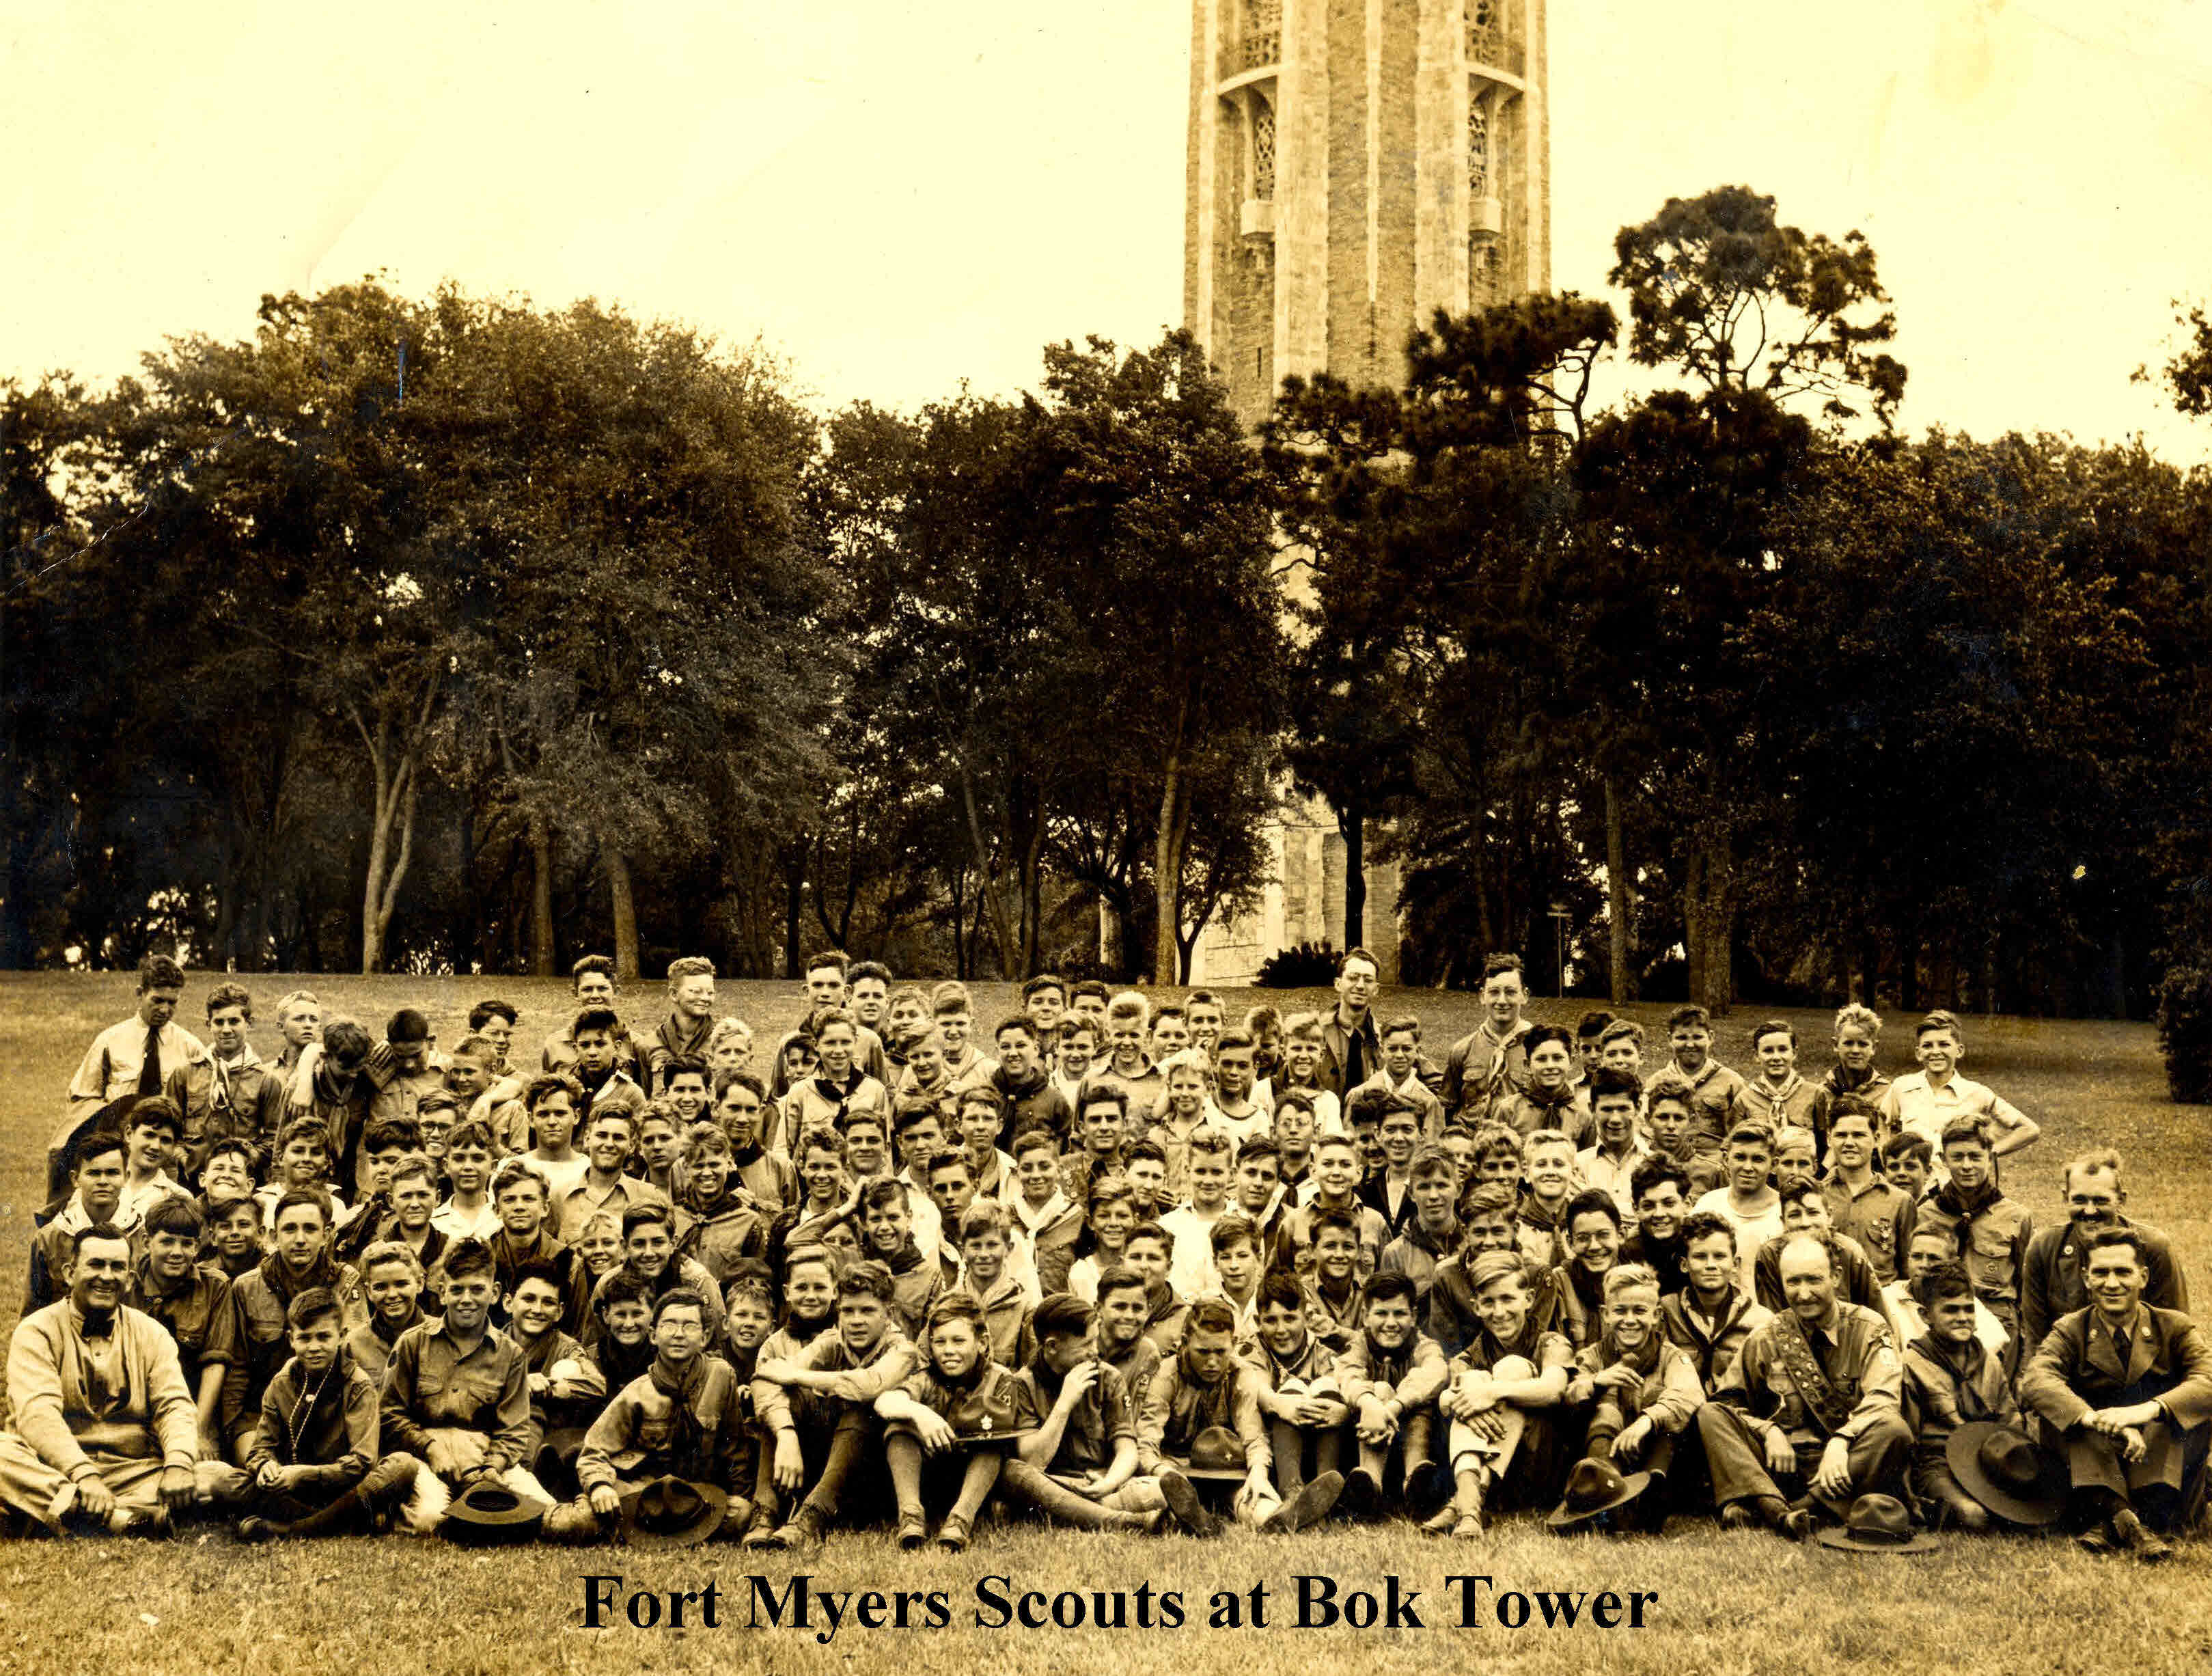 At an unknown date, Scouts from Fort Myers visit the Box Tower (Singing Tower).